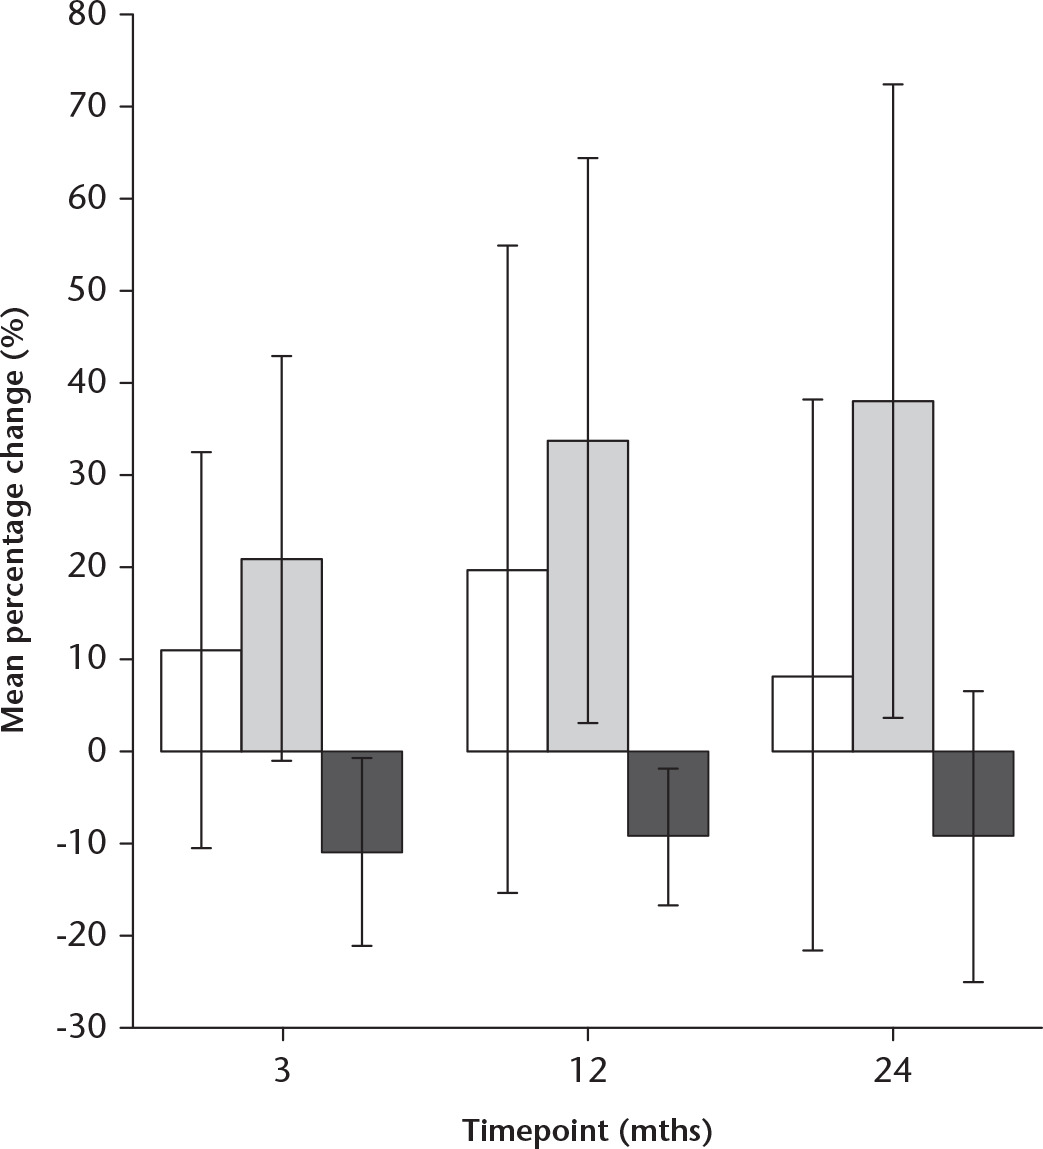 Fig. 2 
            Percentage change in bone mineral density (BMD) compared with the preoperative measure for DeLee and Charnley zone 1 at three, 12, and 24 months for those less than 65 years (white), 65 to 74 years (light grey), and 75 years and older (dark grey).
          